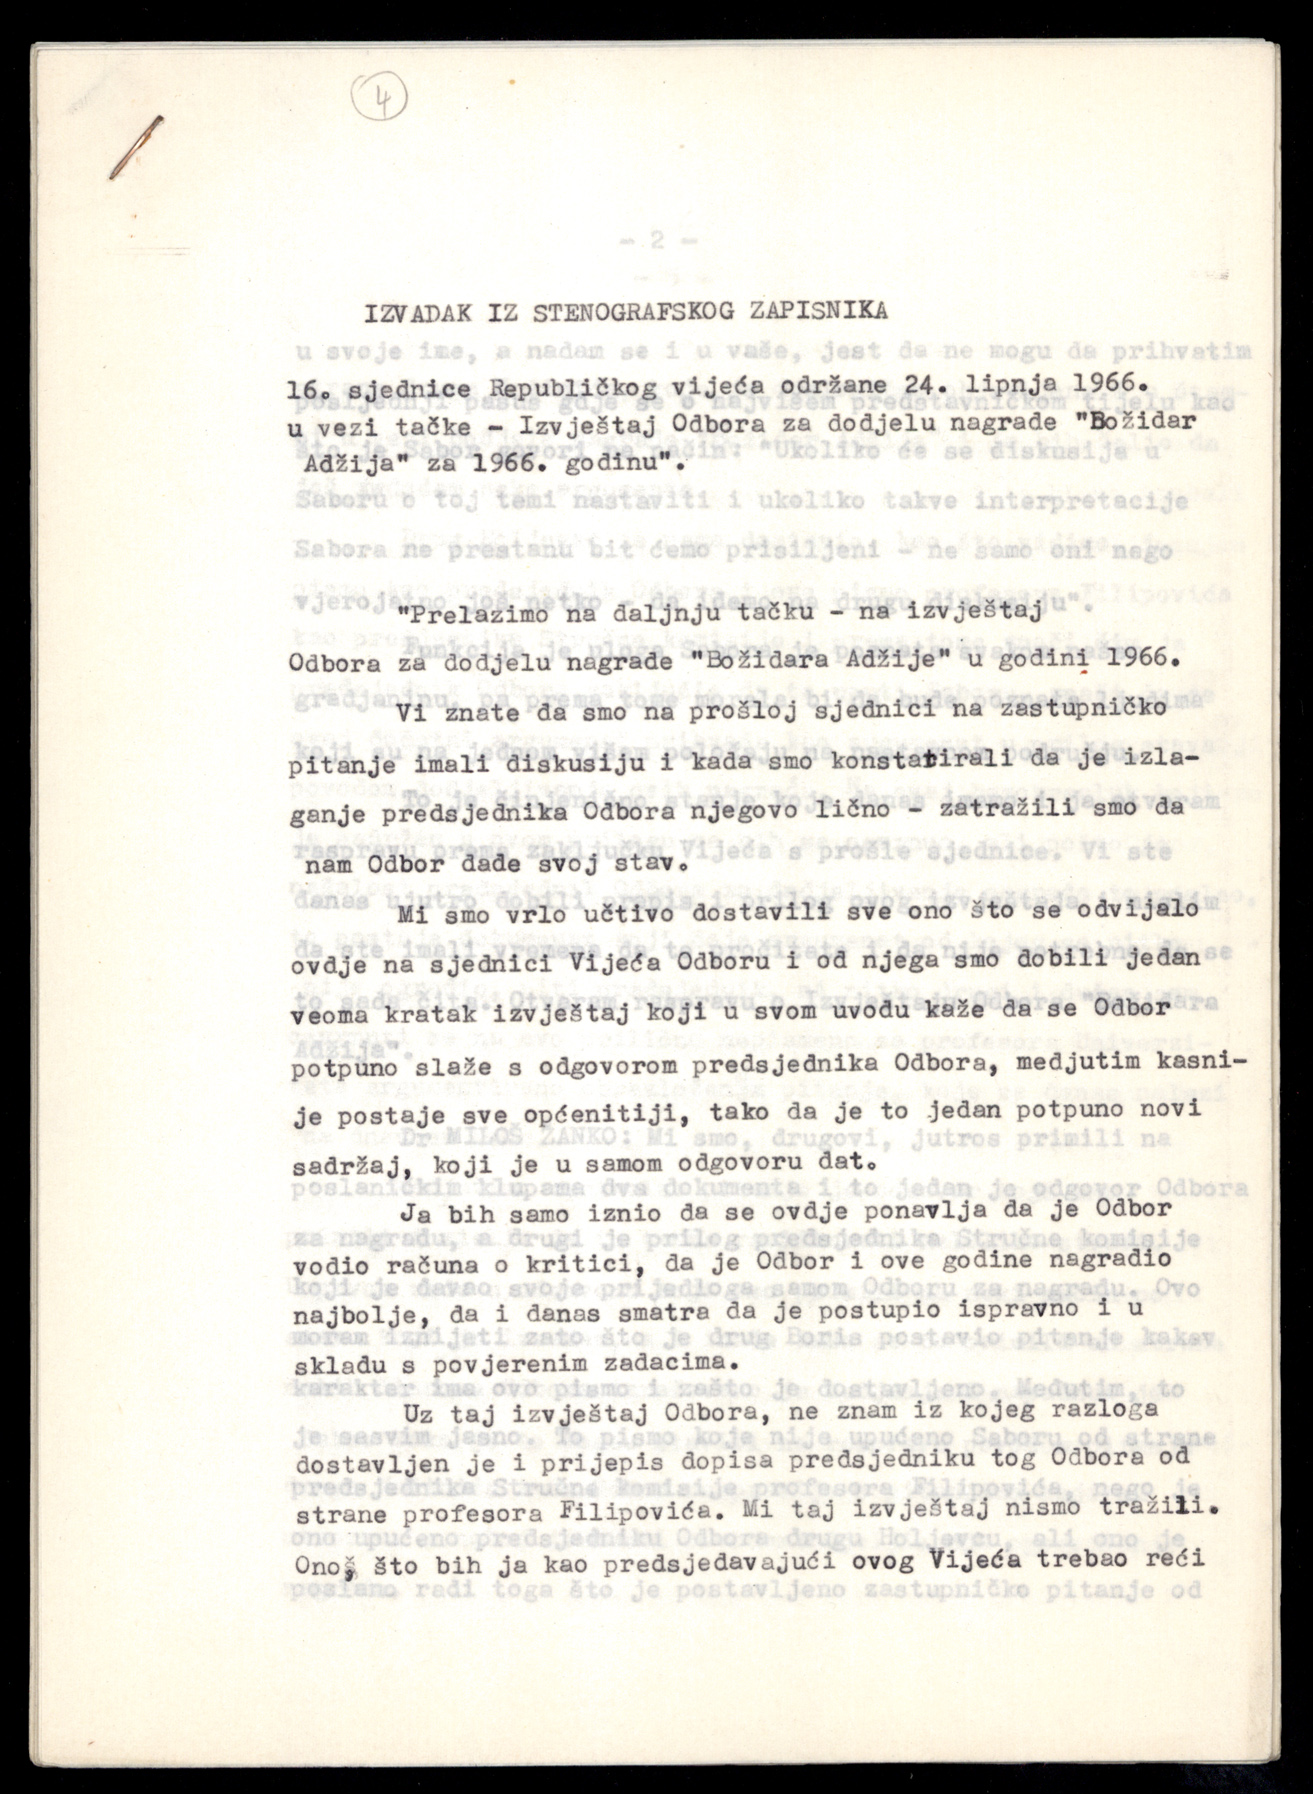 HR-HDA-1220.3.2.1. League of Communisis of Croatia Central Committee, Executive Committee, Commission for the examination of nationalist phenomena in the Emigrant Foundation of Croatia, Excerpt from the Stenographic Record of the 16th Session of the Republic Council of the Socialist Republic of Croatia Parliament, 24 June 1966 - Report of the „Božidar Adžija“ Award Committee for 1966  